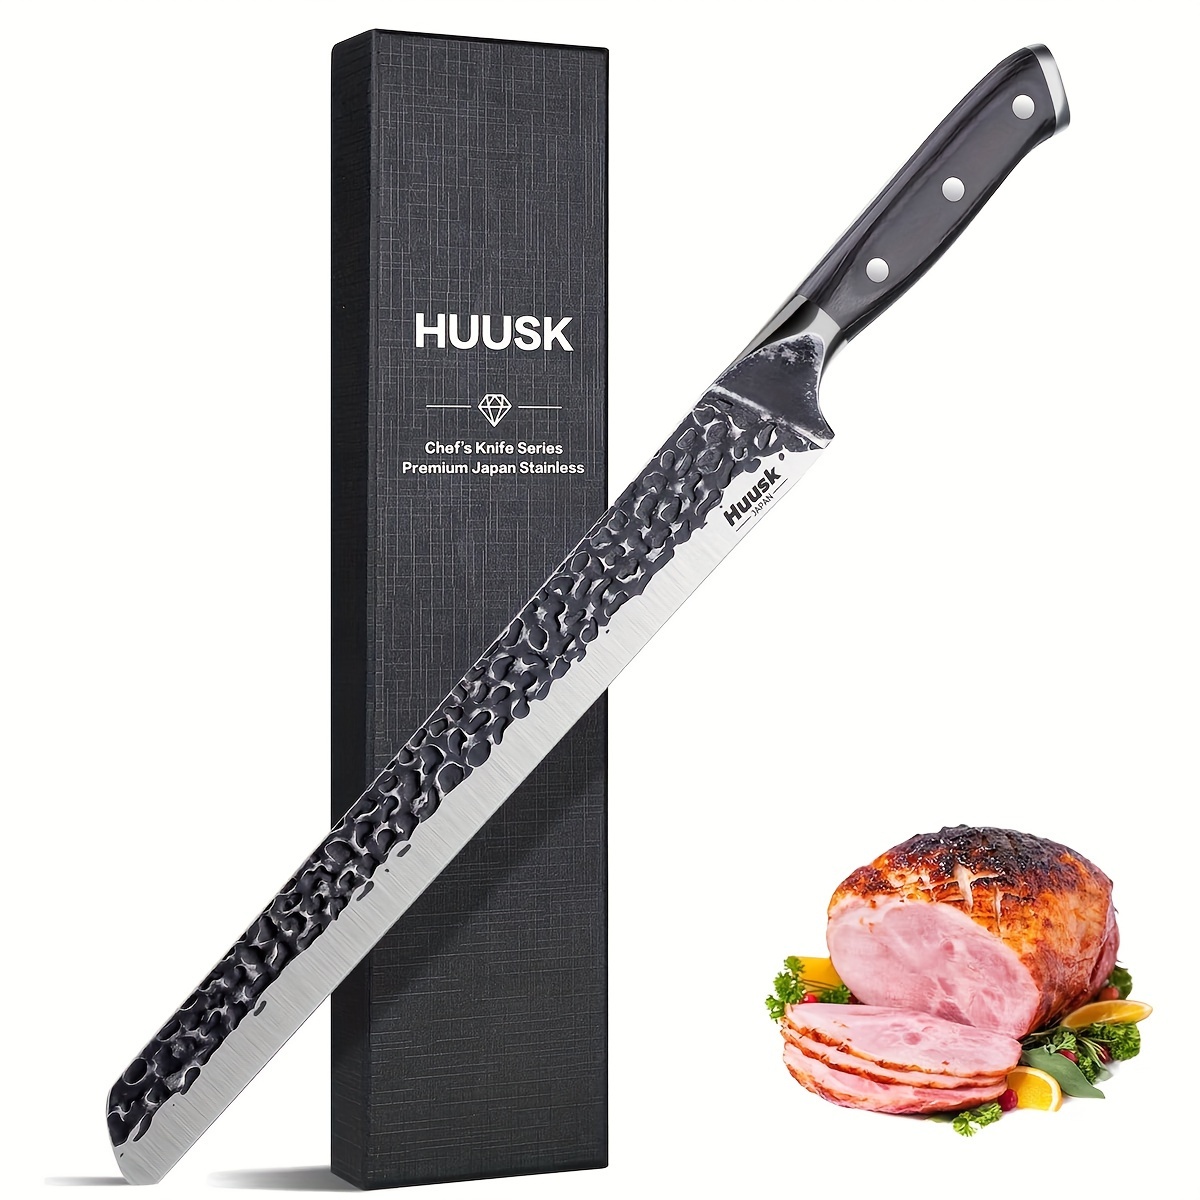 

Japan 12 Inch Hand Forged Slicing Knife For Meats, Ribs, Roasts - Brisket Carving Knife For Bbq And Christmas Gifts